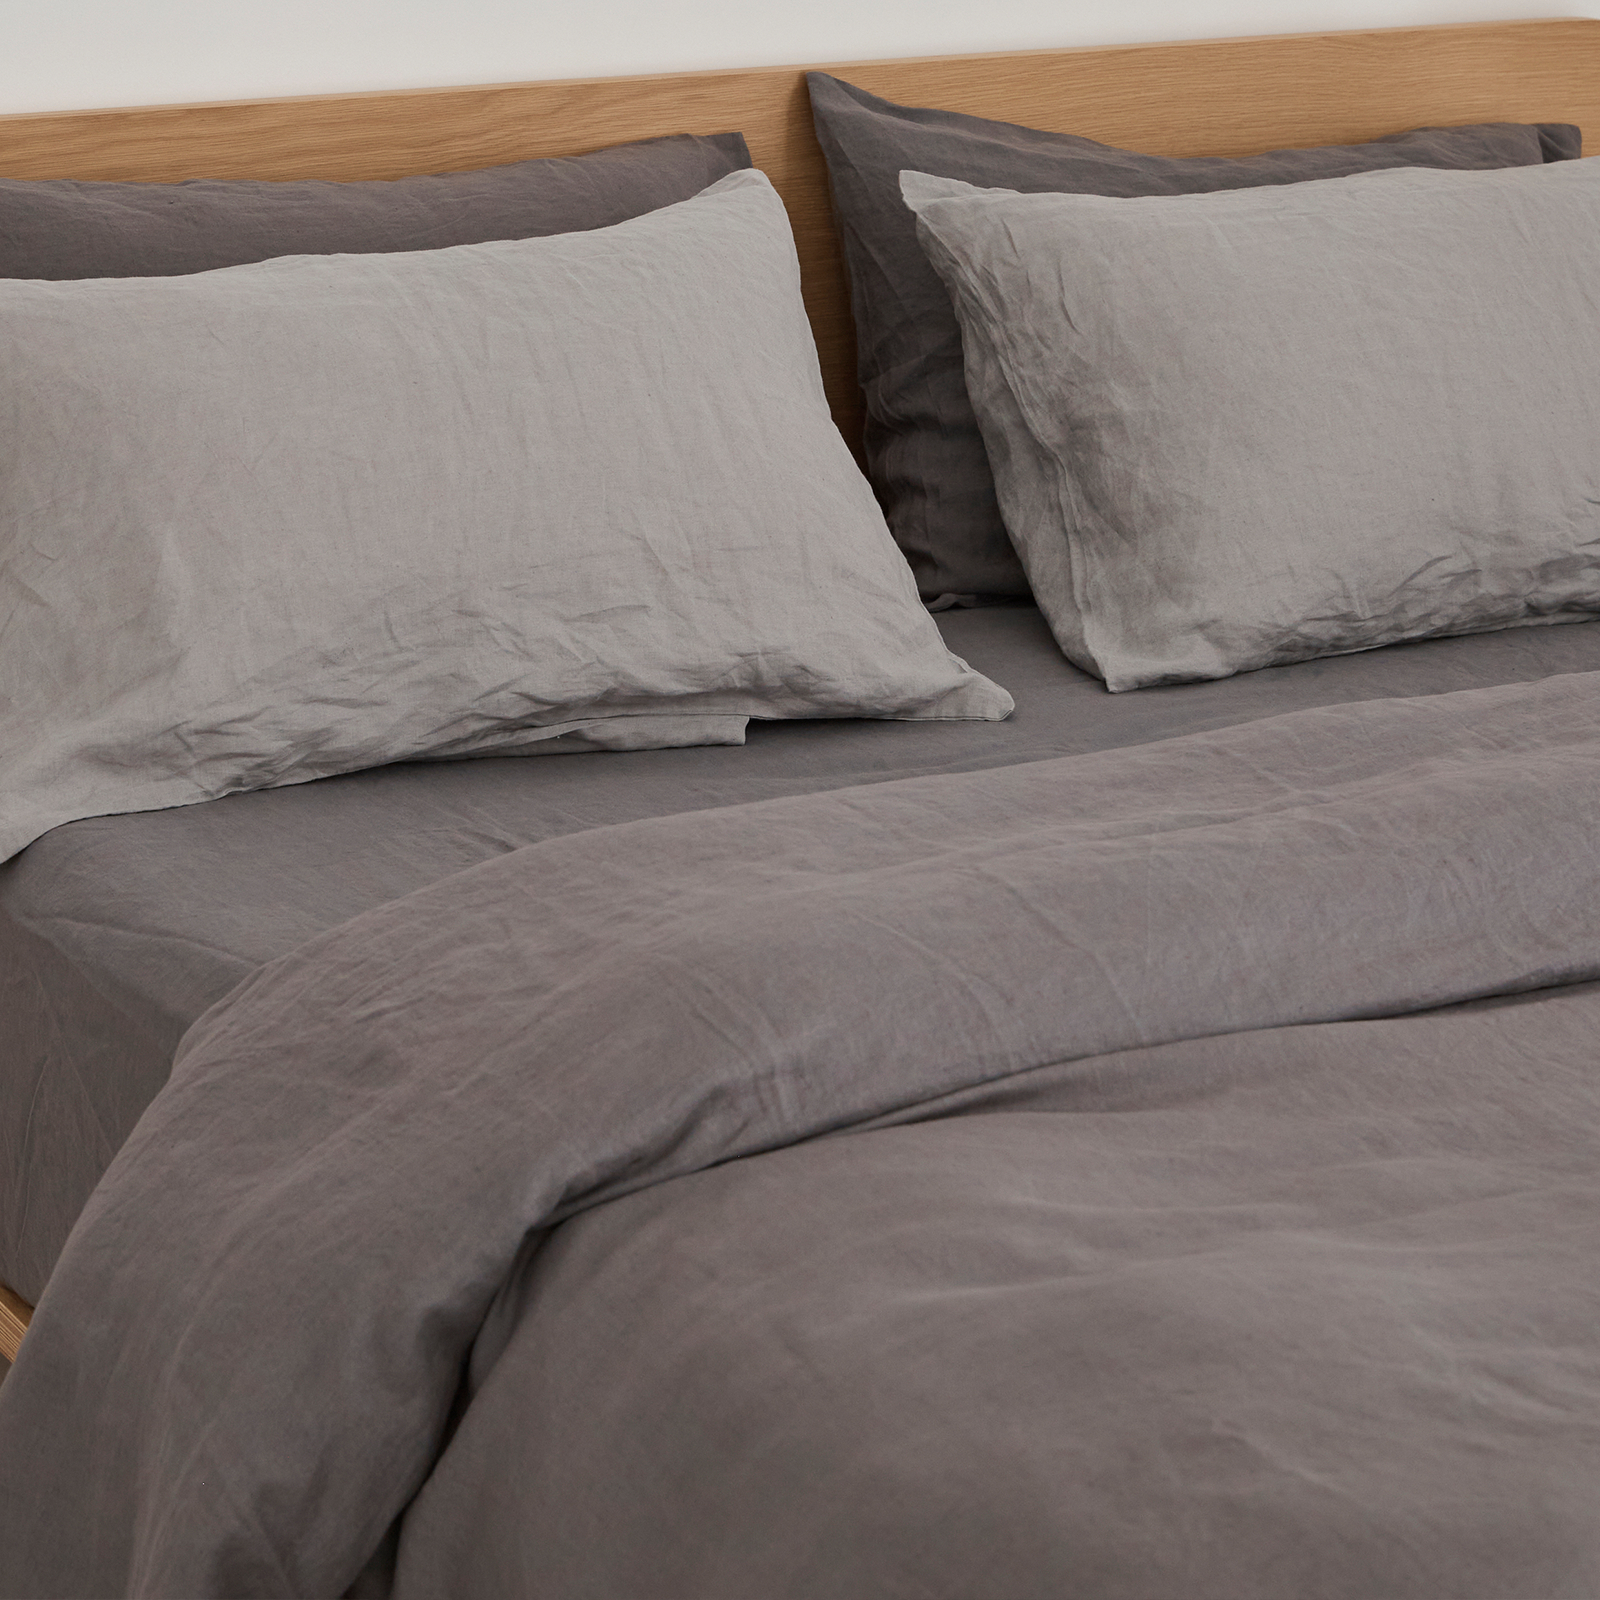 100% pure French linen Duvet Cover in Warm Grey